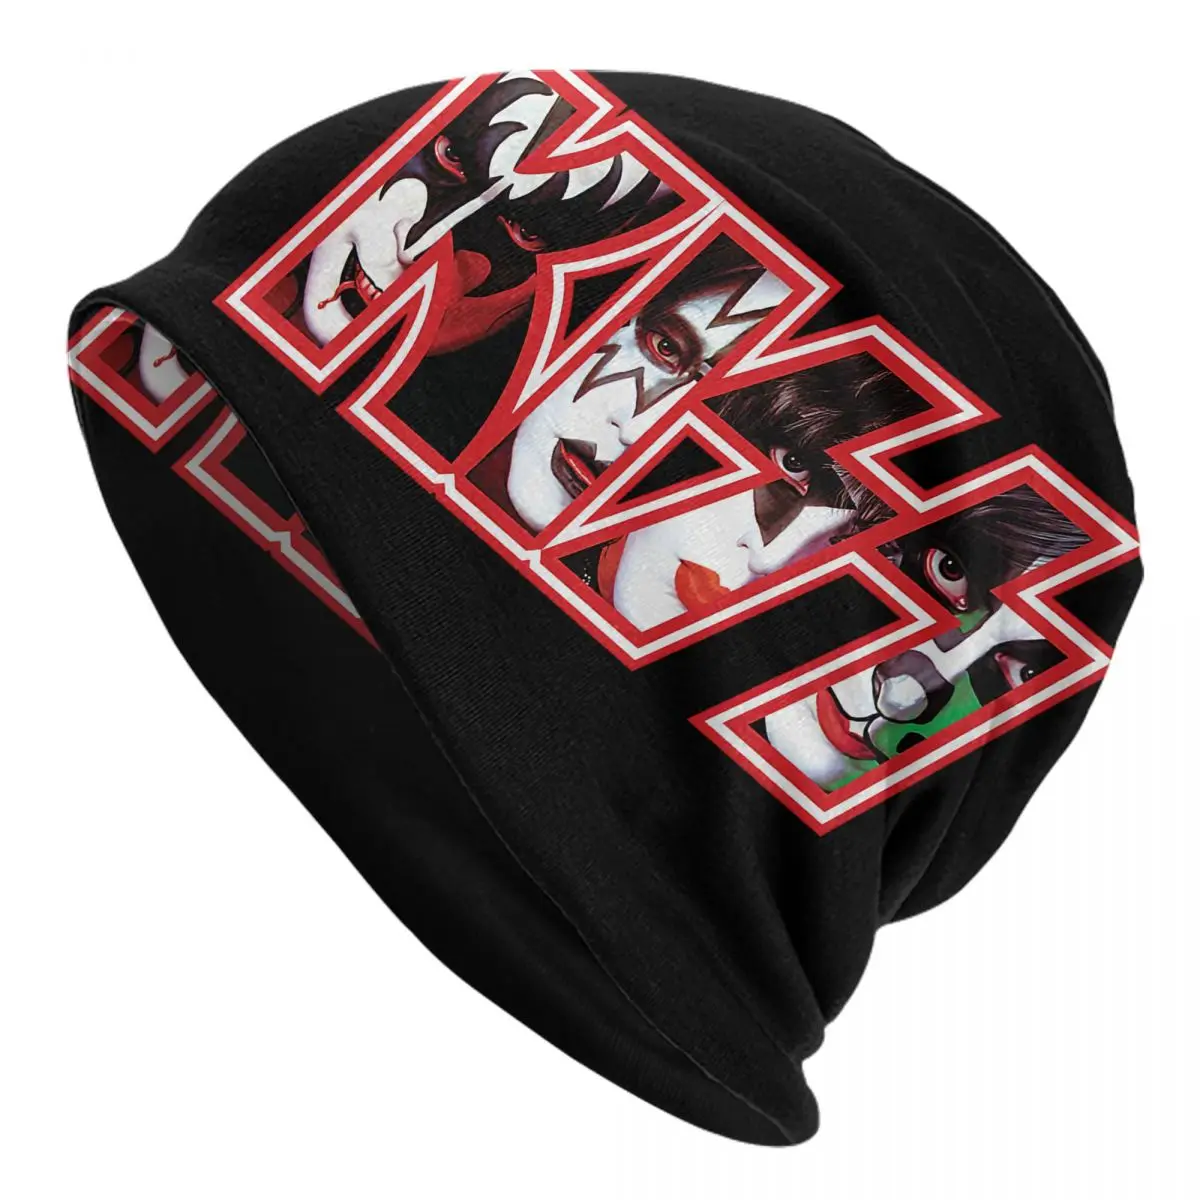 Kiss Band Adult Men's Women's Knit Hat Keep warm winter Funny knitted hat